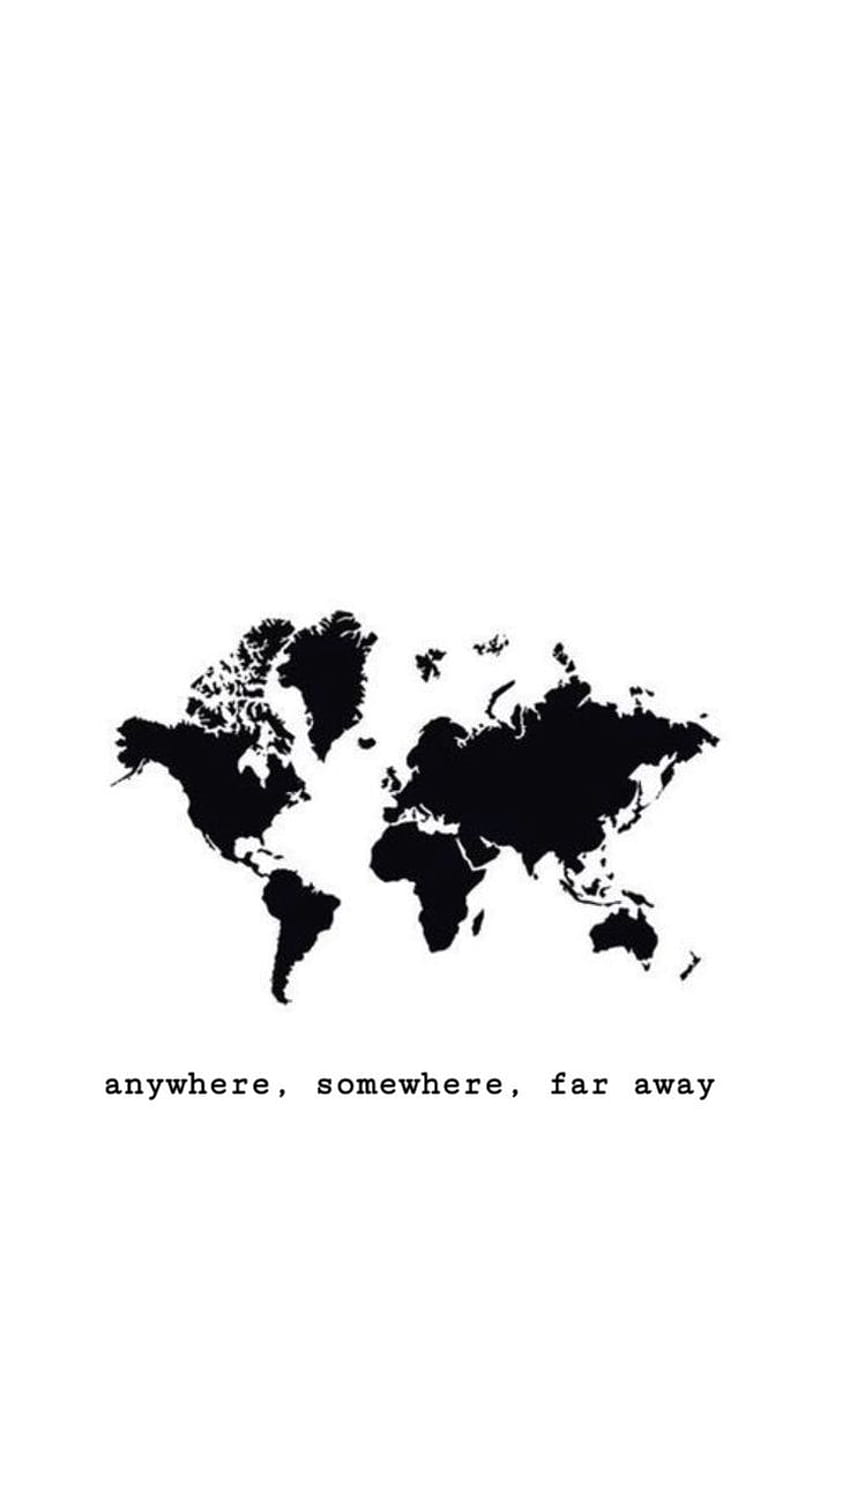 1290x2796px, 2K Free download | Where do I want to go? Anywhere ...